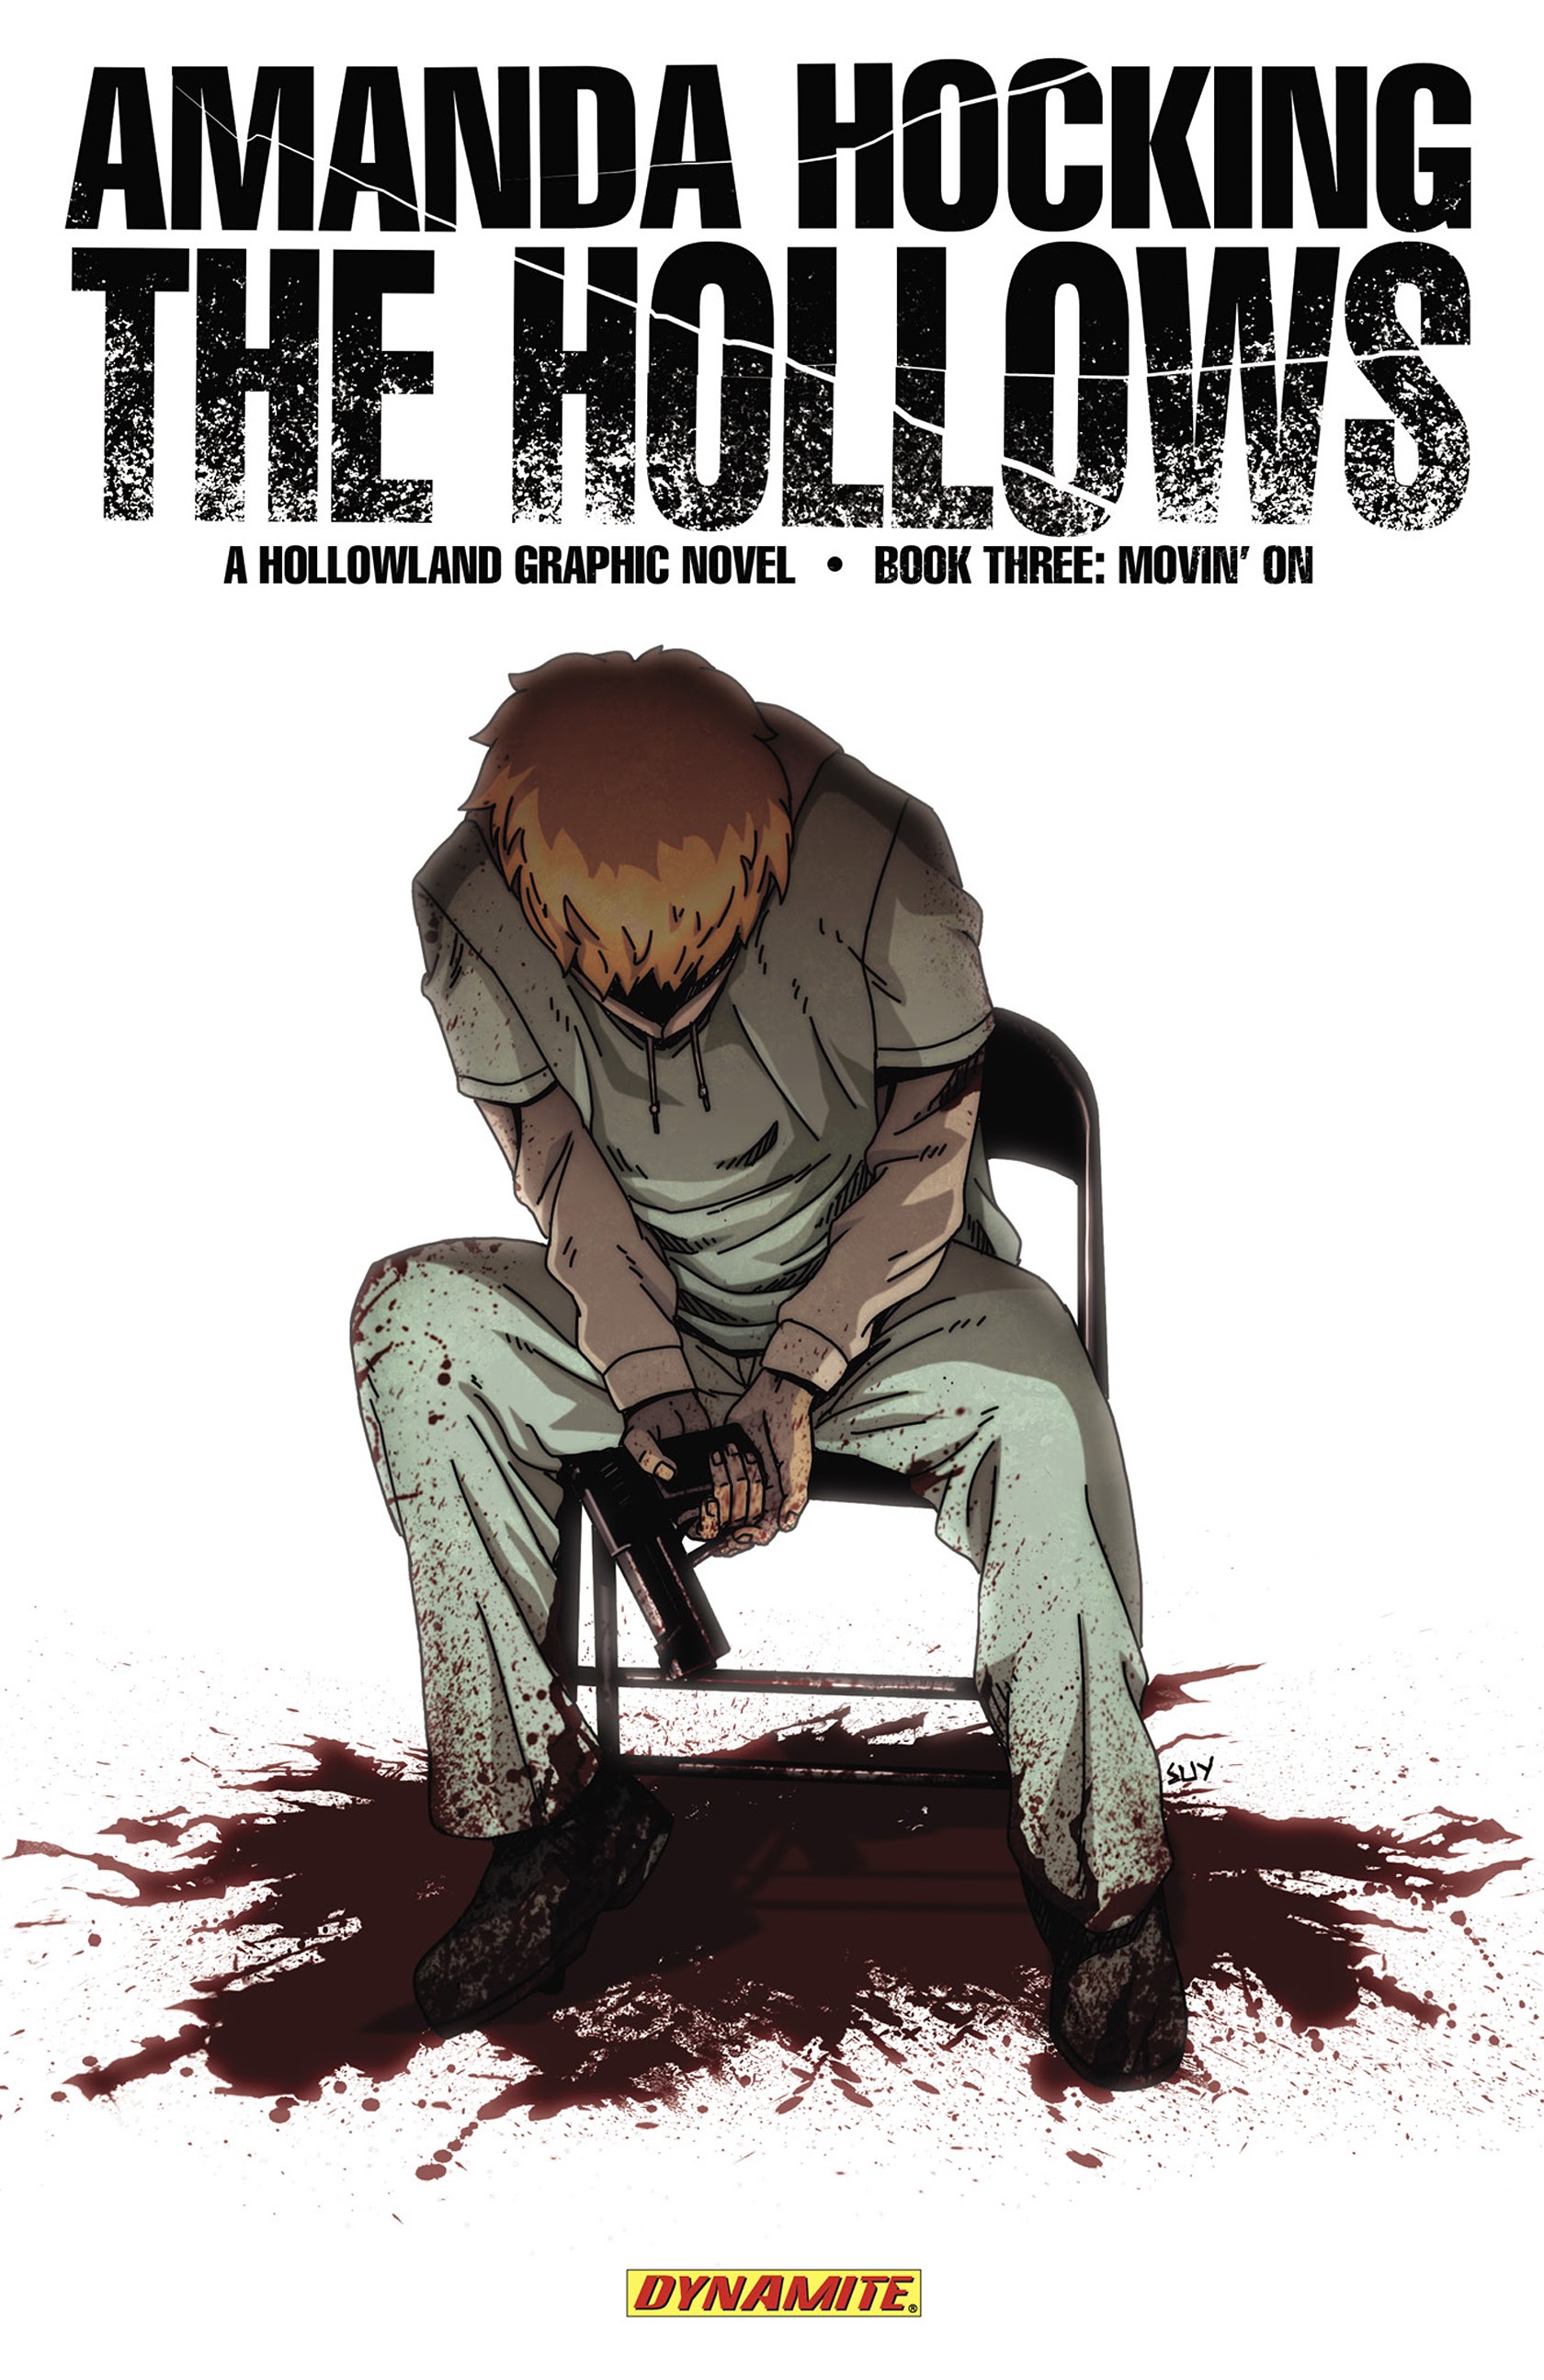 Read online Amanda Hocking's The Hollows: A Hollowland Graphic Novel comic -  Issue #3 - 1